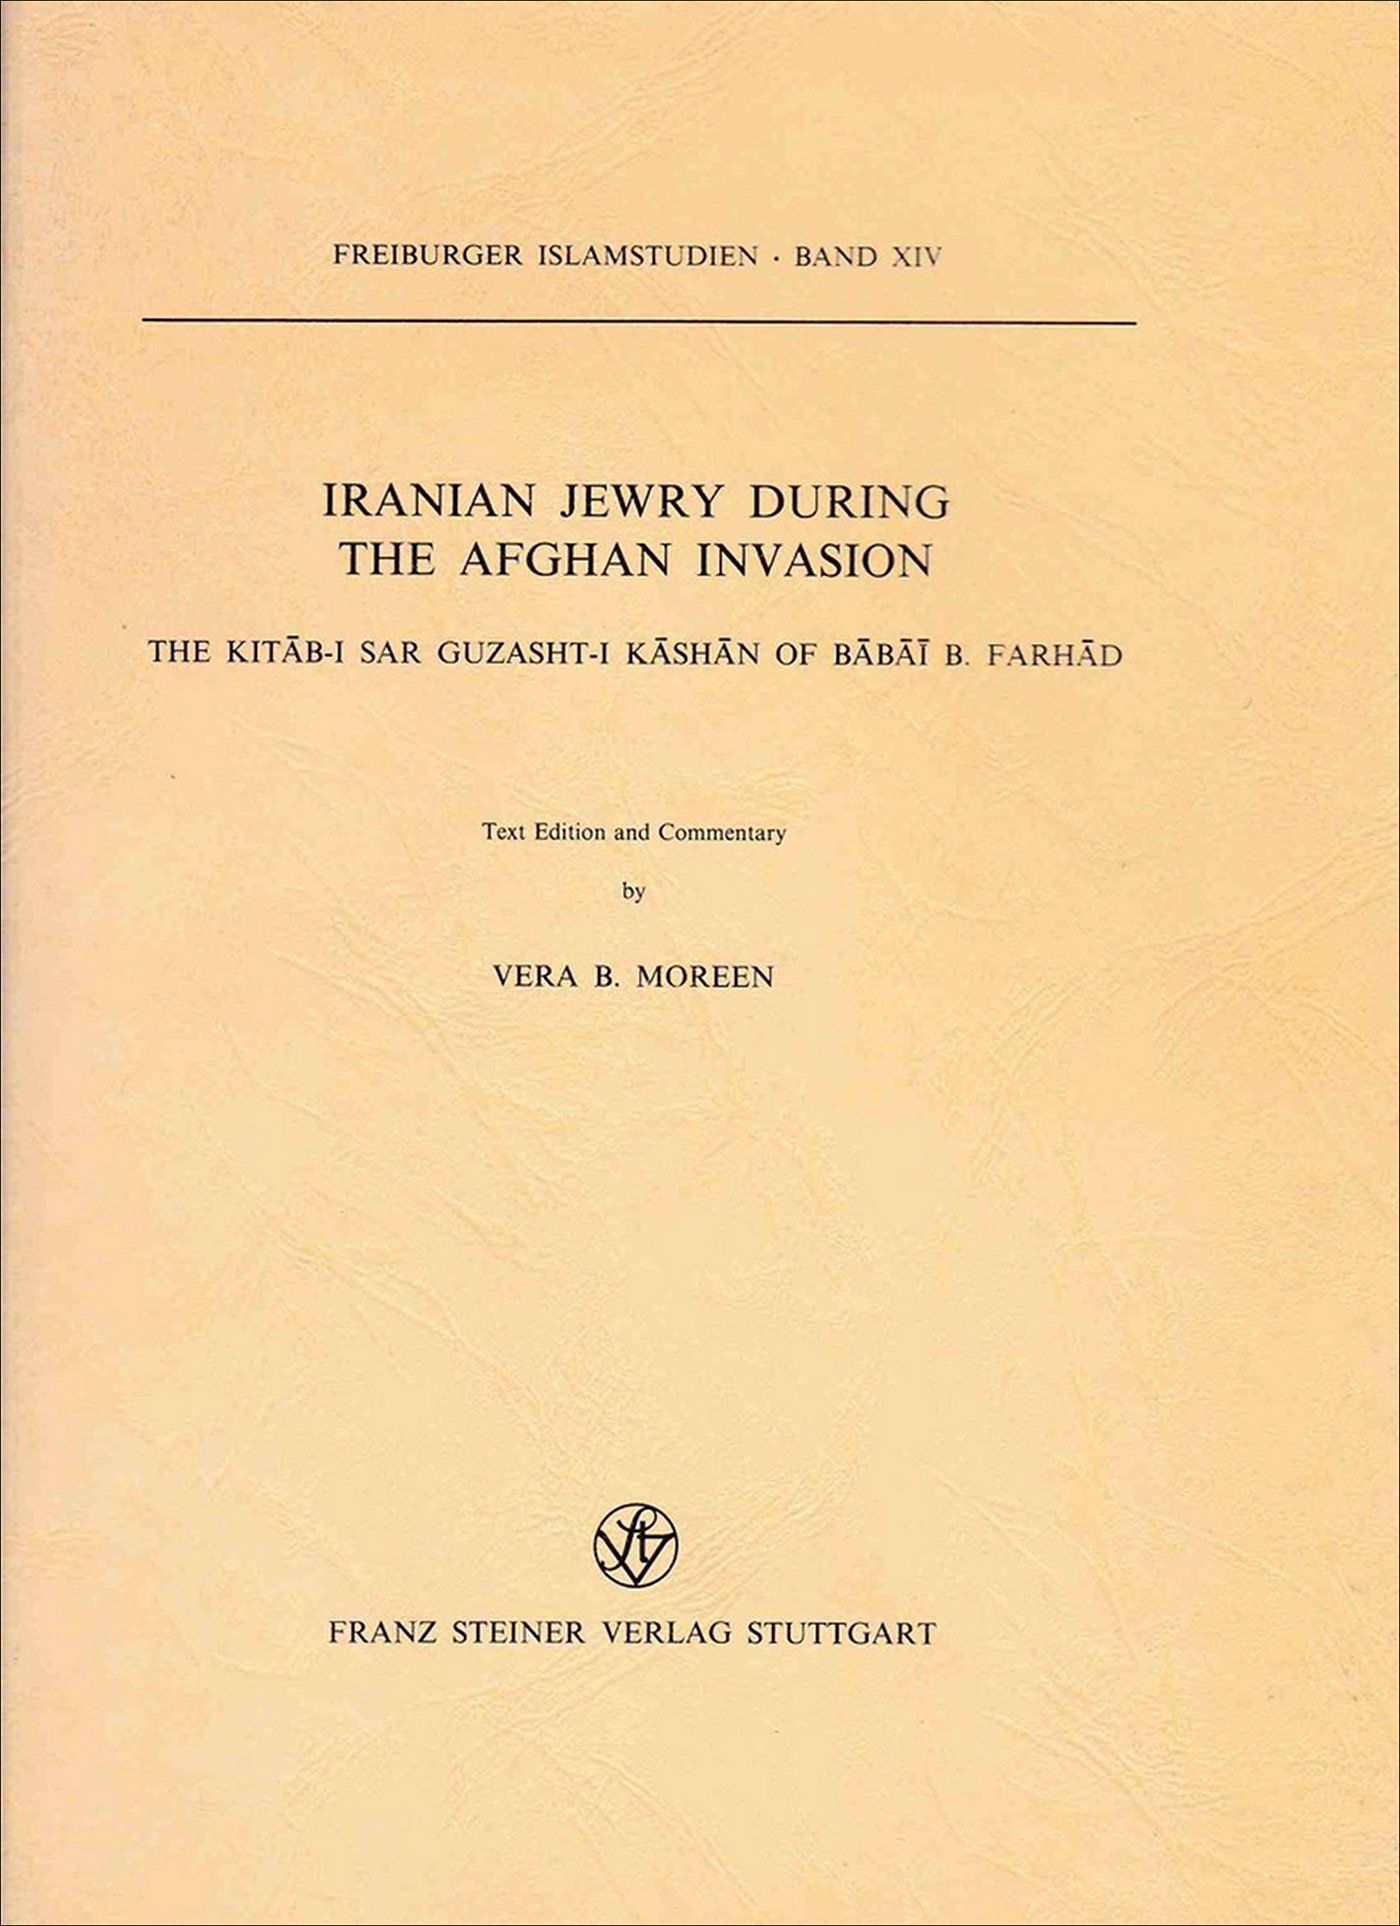 Iranian Jewry during Afghan Invasion